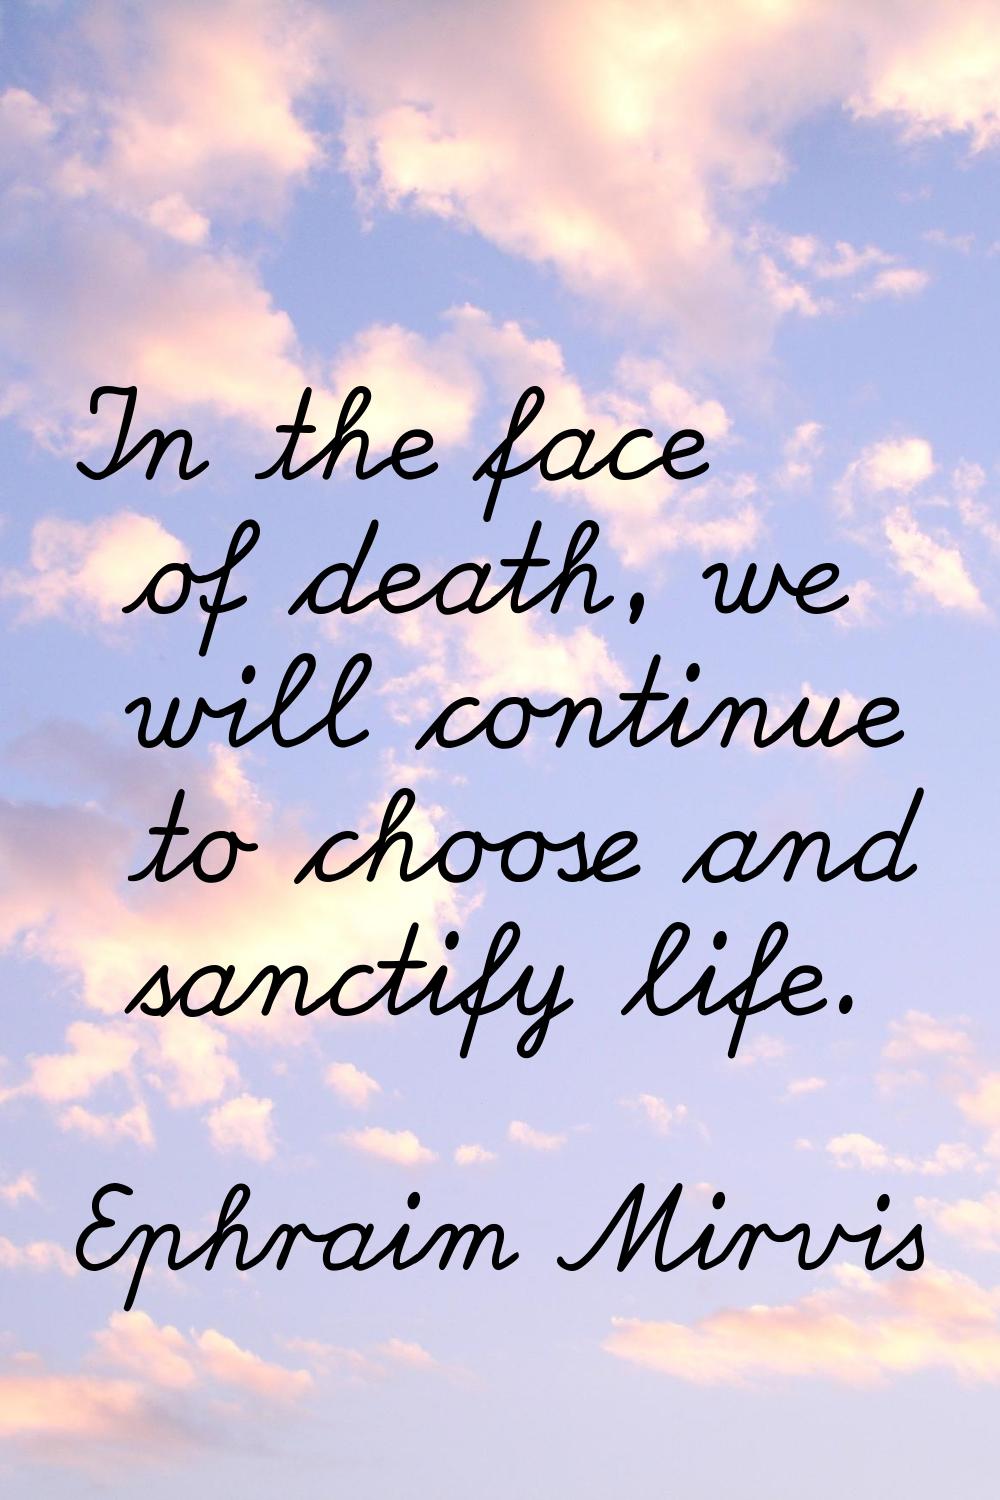 In the face of death, we will continue to choose and sanctify life.